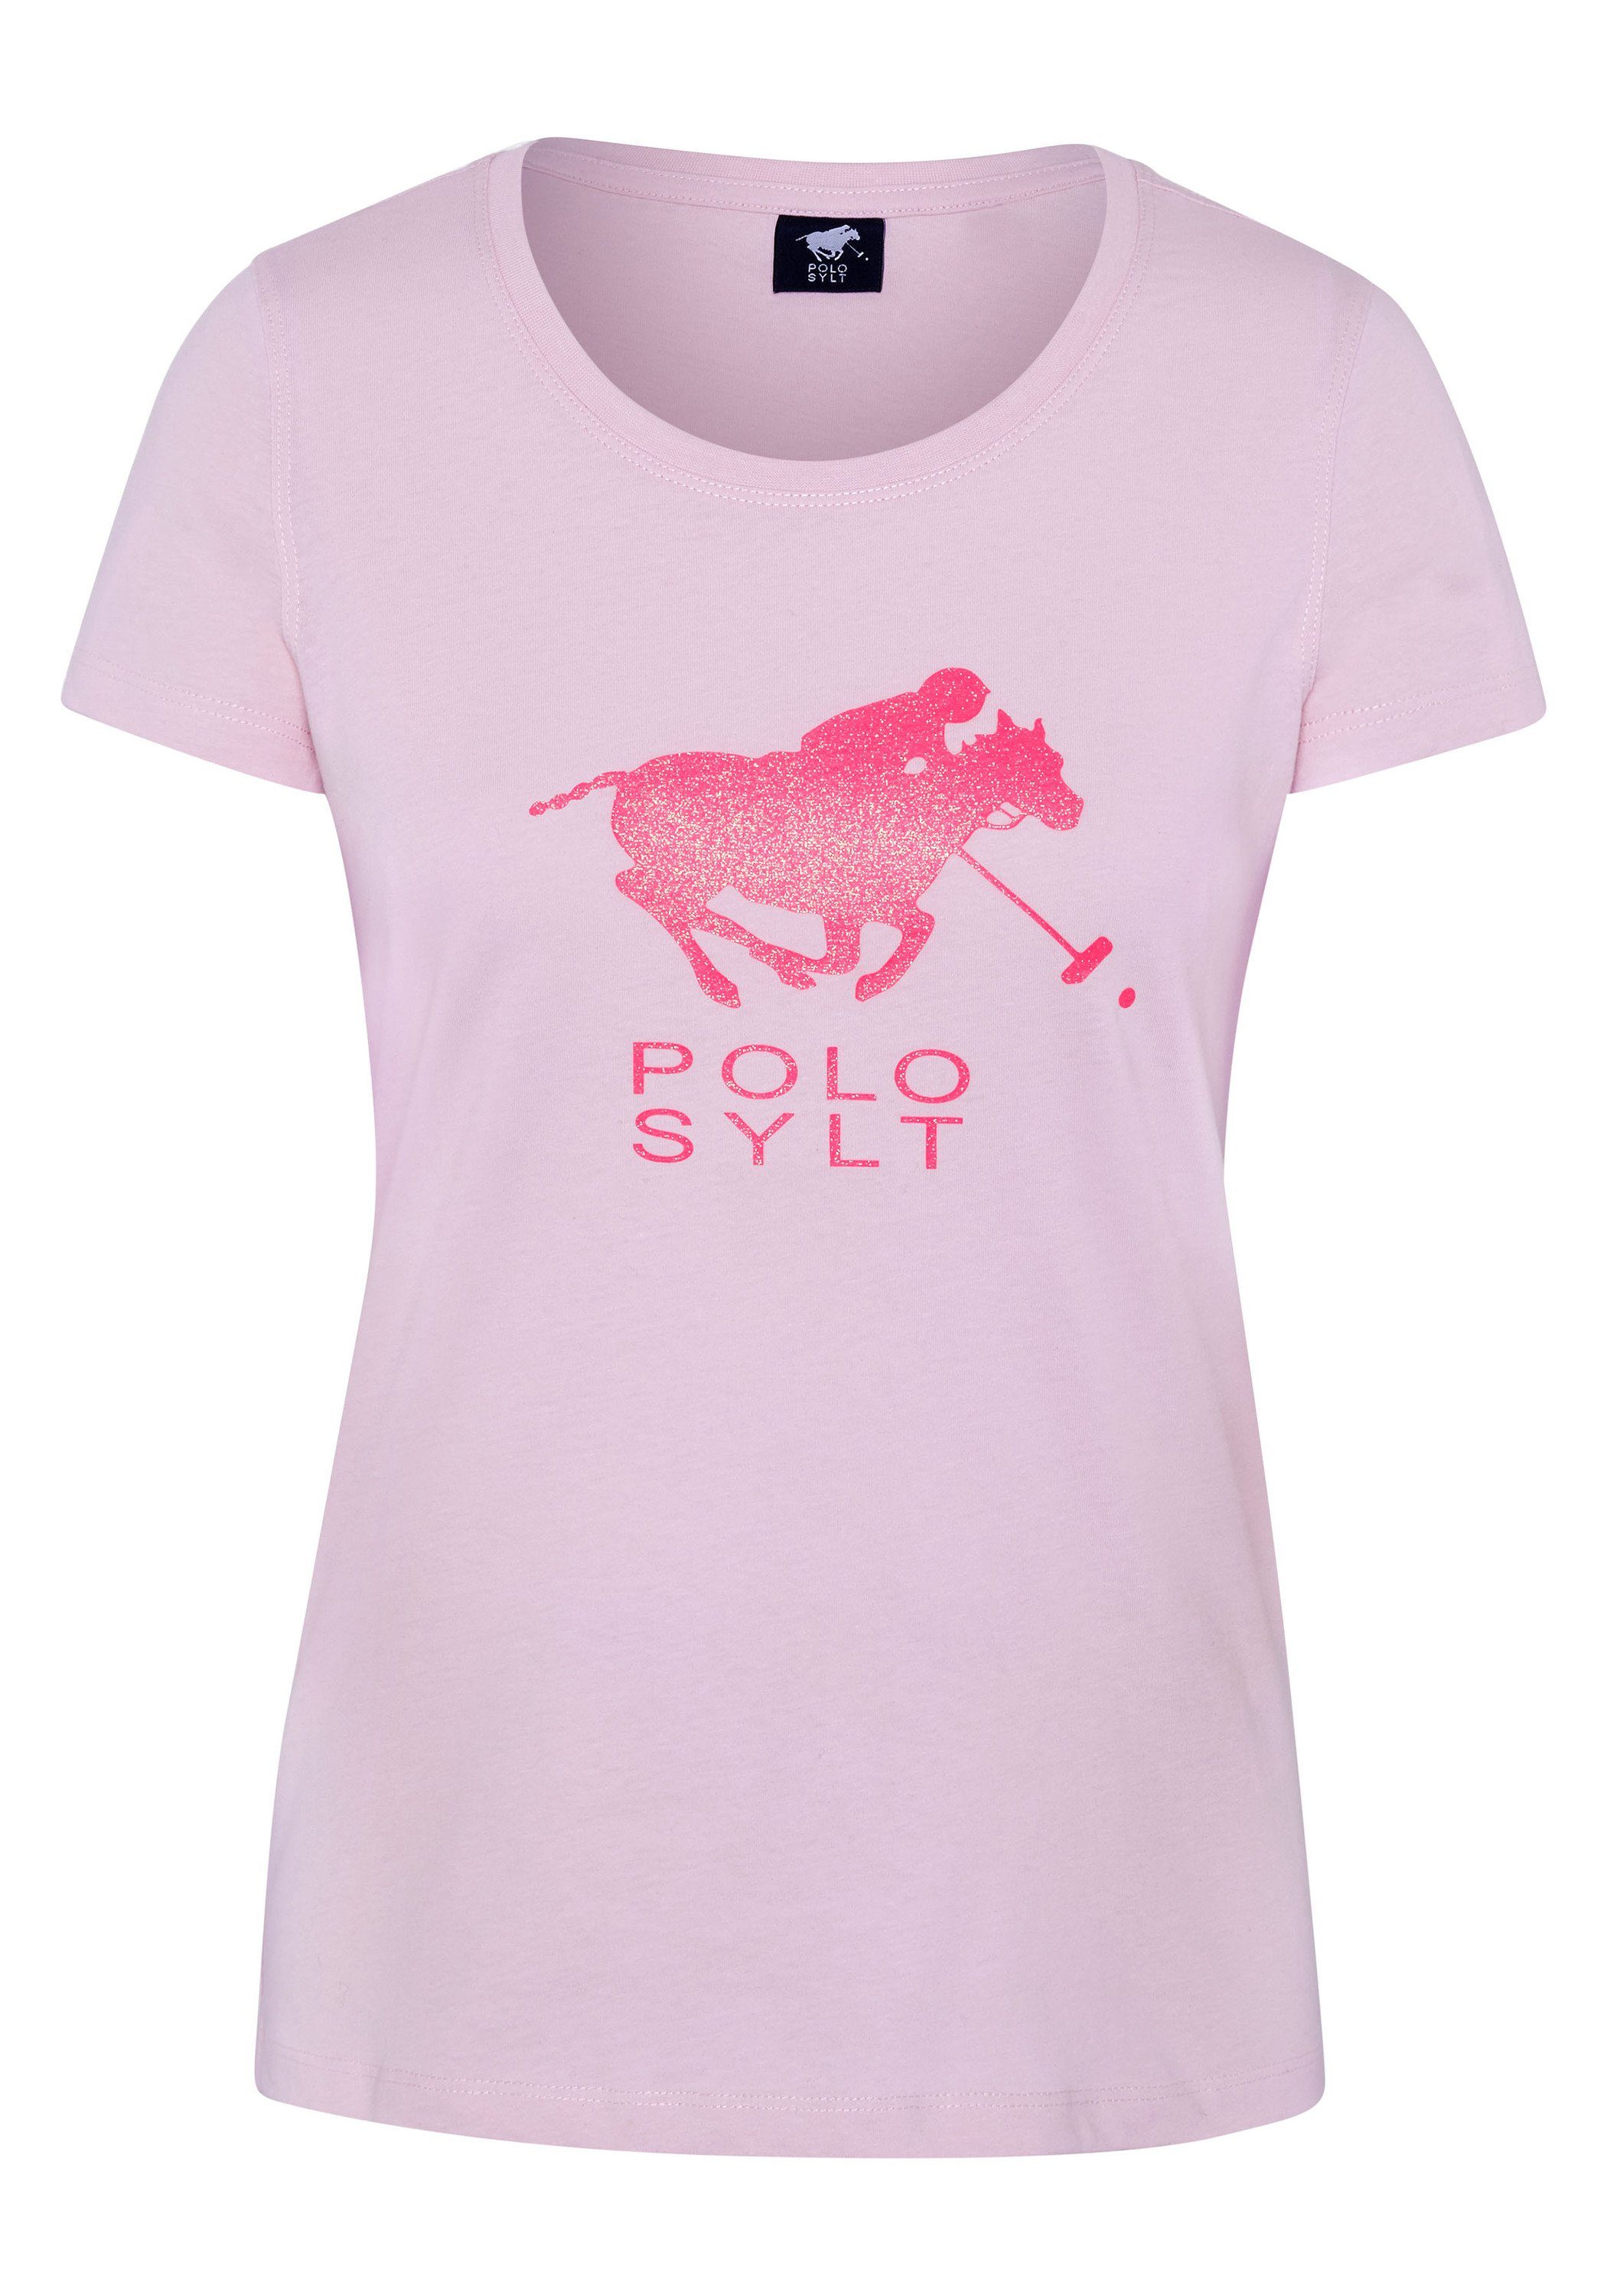 Polo Sylt Print-Shirt in figurbetonter Passform Pink Lady